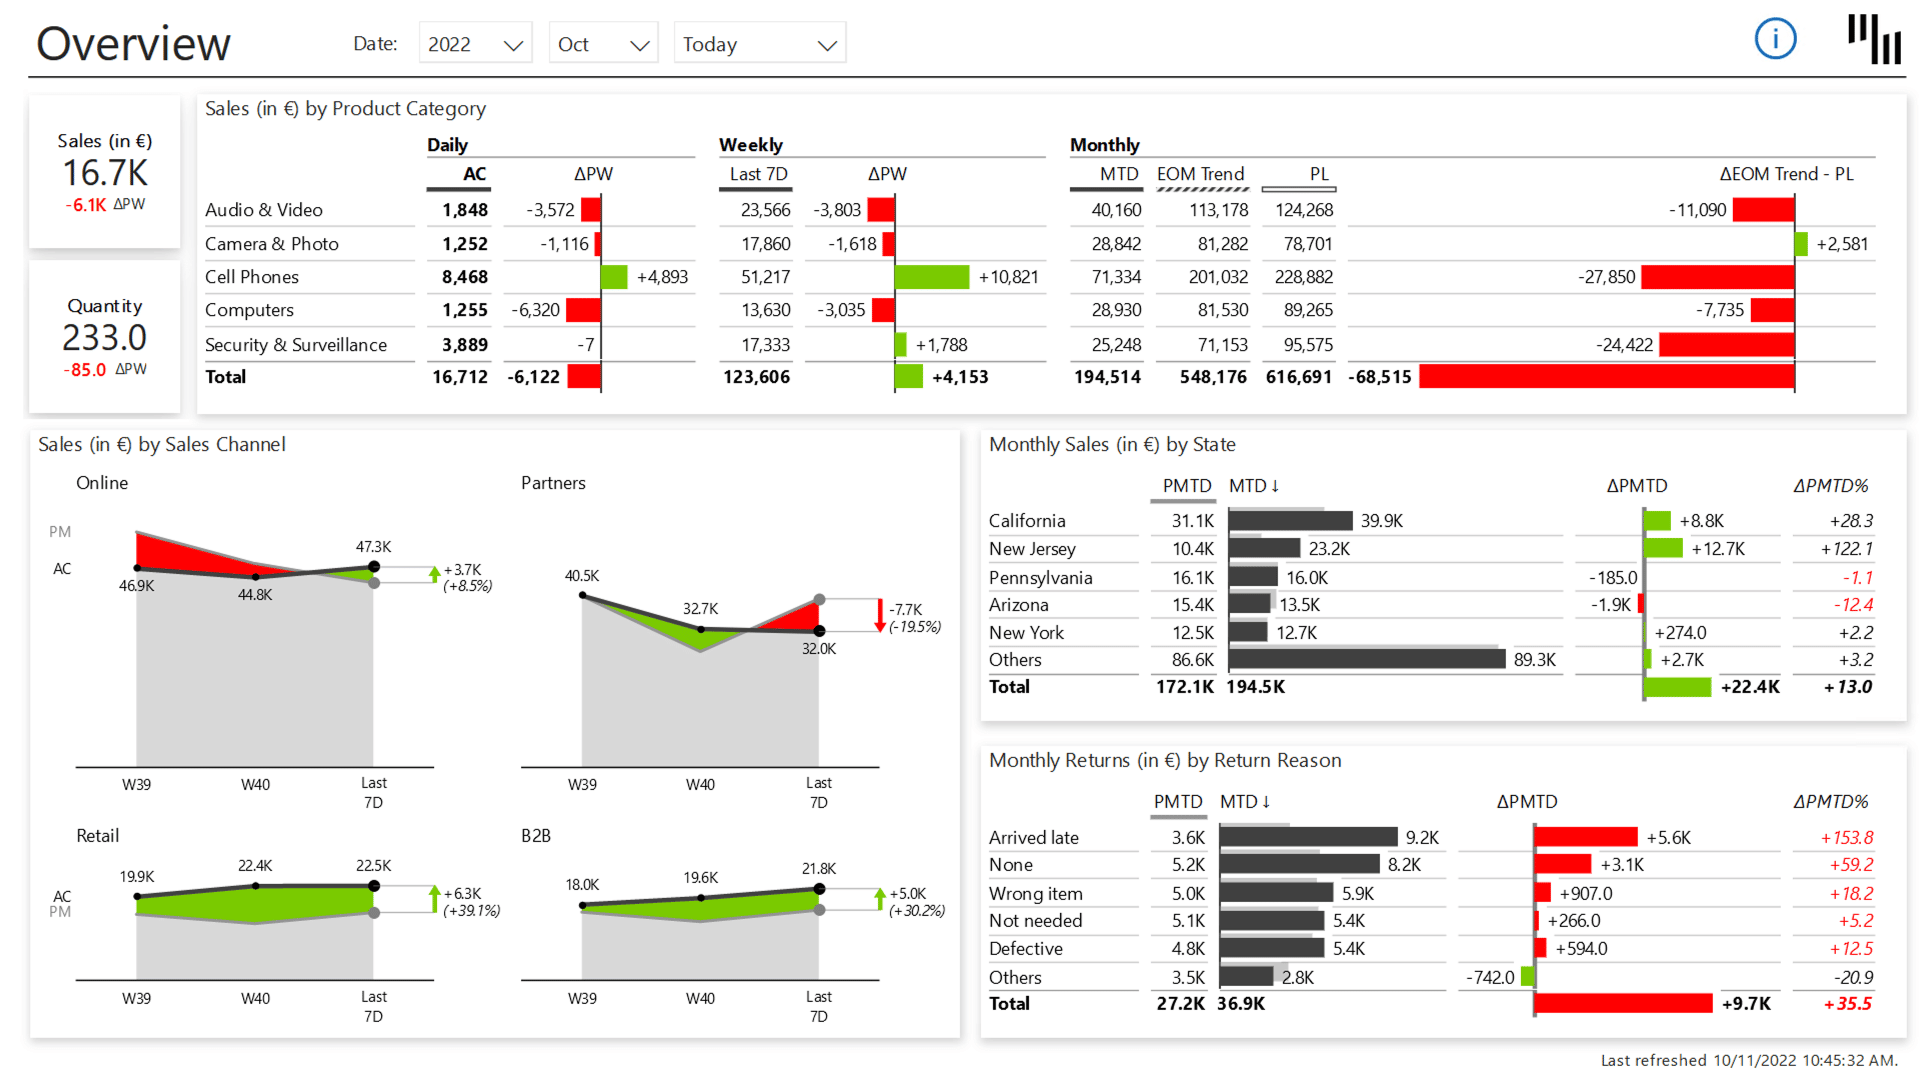 Daily Sales Flash Power BI Dashboard - 1 Overview